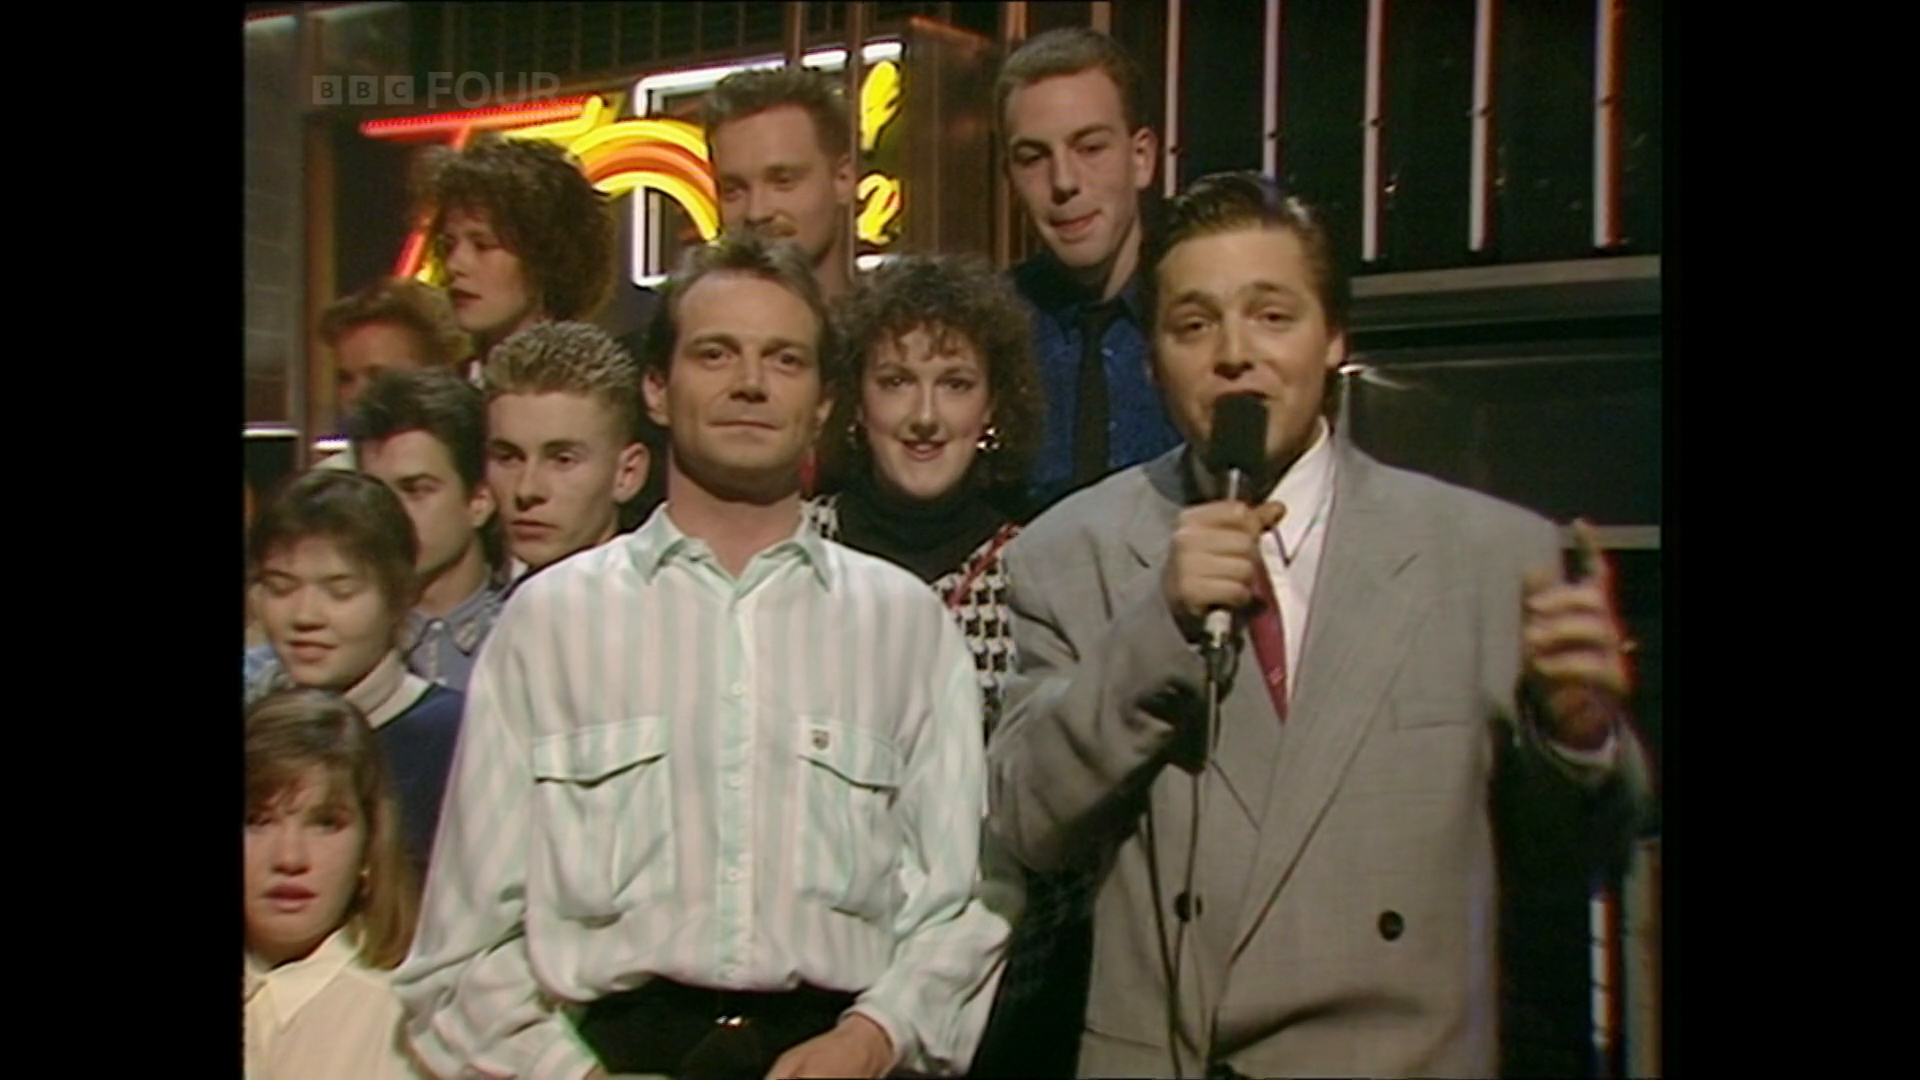 Peter Powell and Mark Goodier  - Top of the Pops (February 25th, 1988)